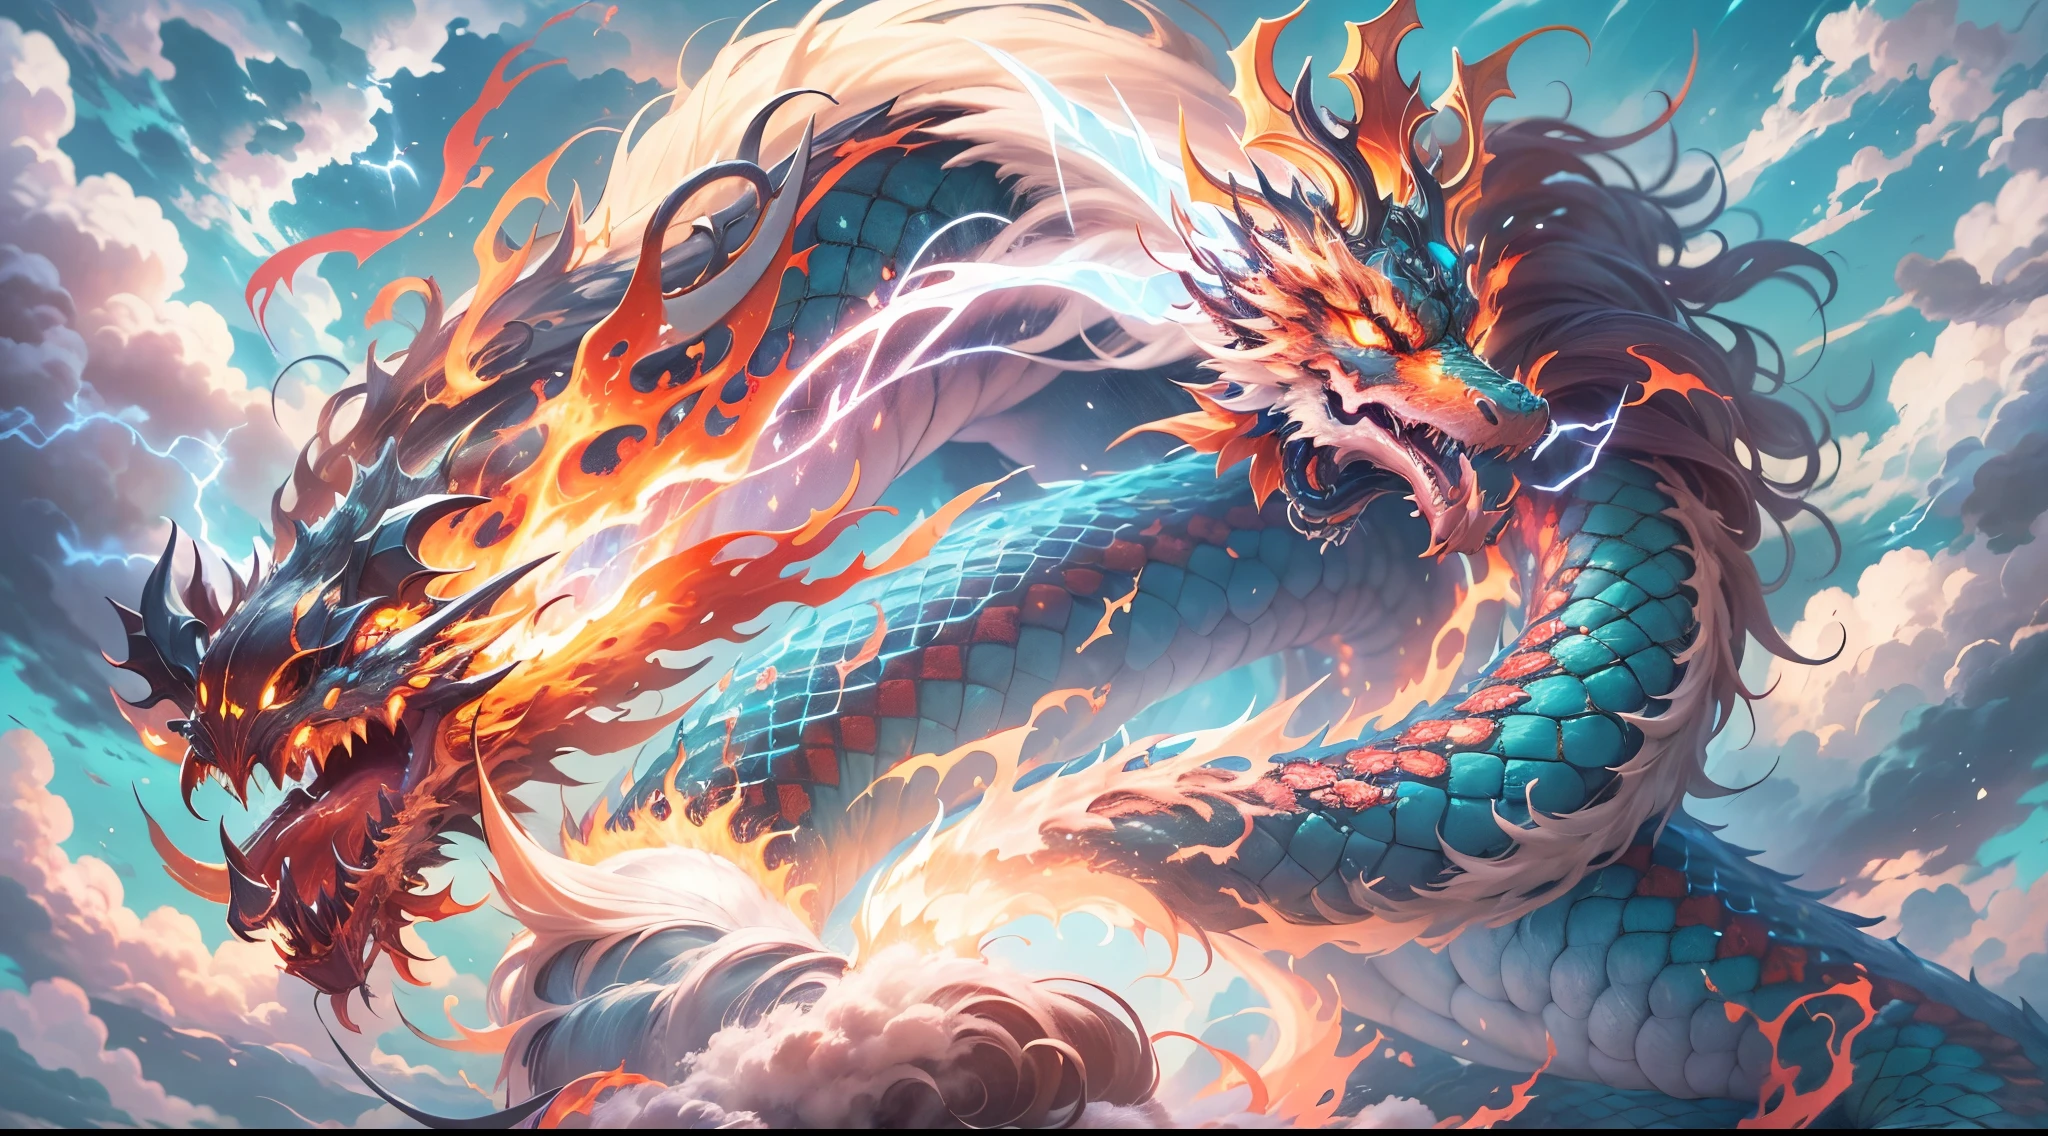 chinese dragon concept art, smooth chinese dragon, Portrait of a cyborg dragon, mythological creatures, Chinese Dragon, ultra detailed Digital art, great digital art with details, dragon portrait, cyan chinese dragon fantasy